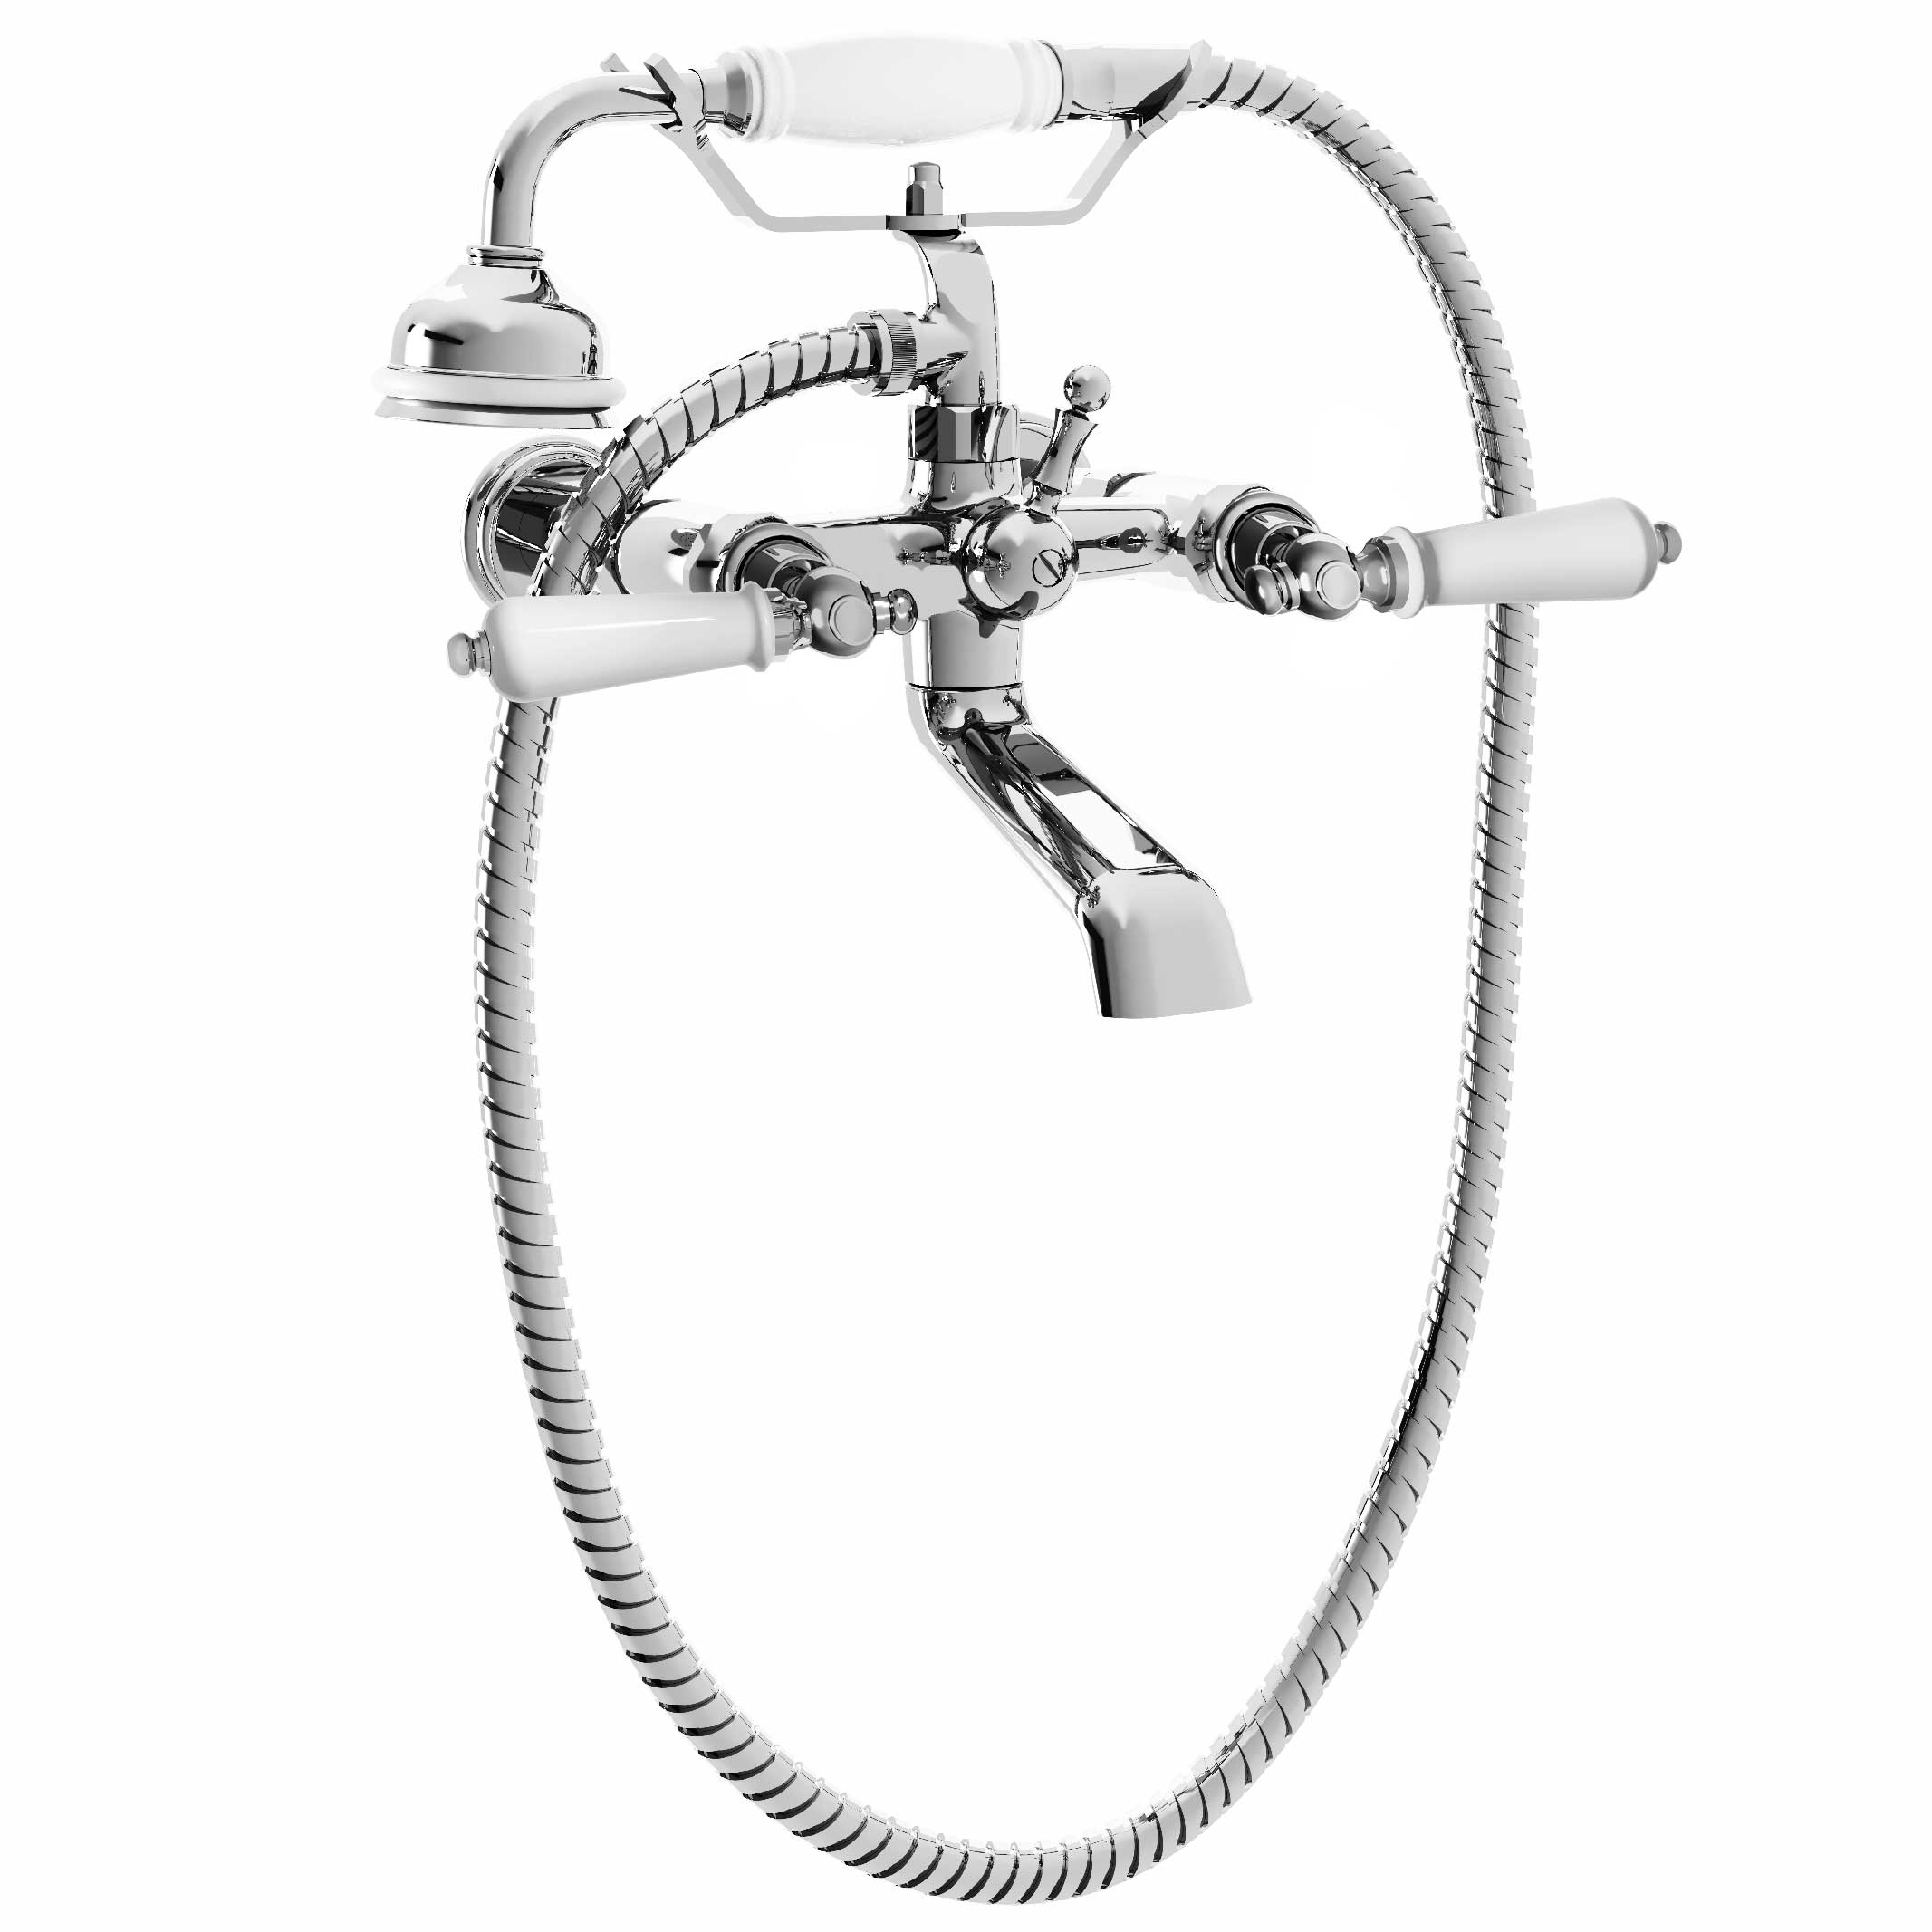 M32-3201 Wall mounted bath and shower mixer